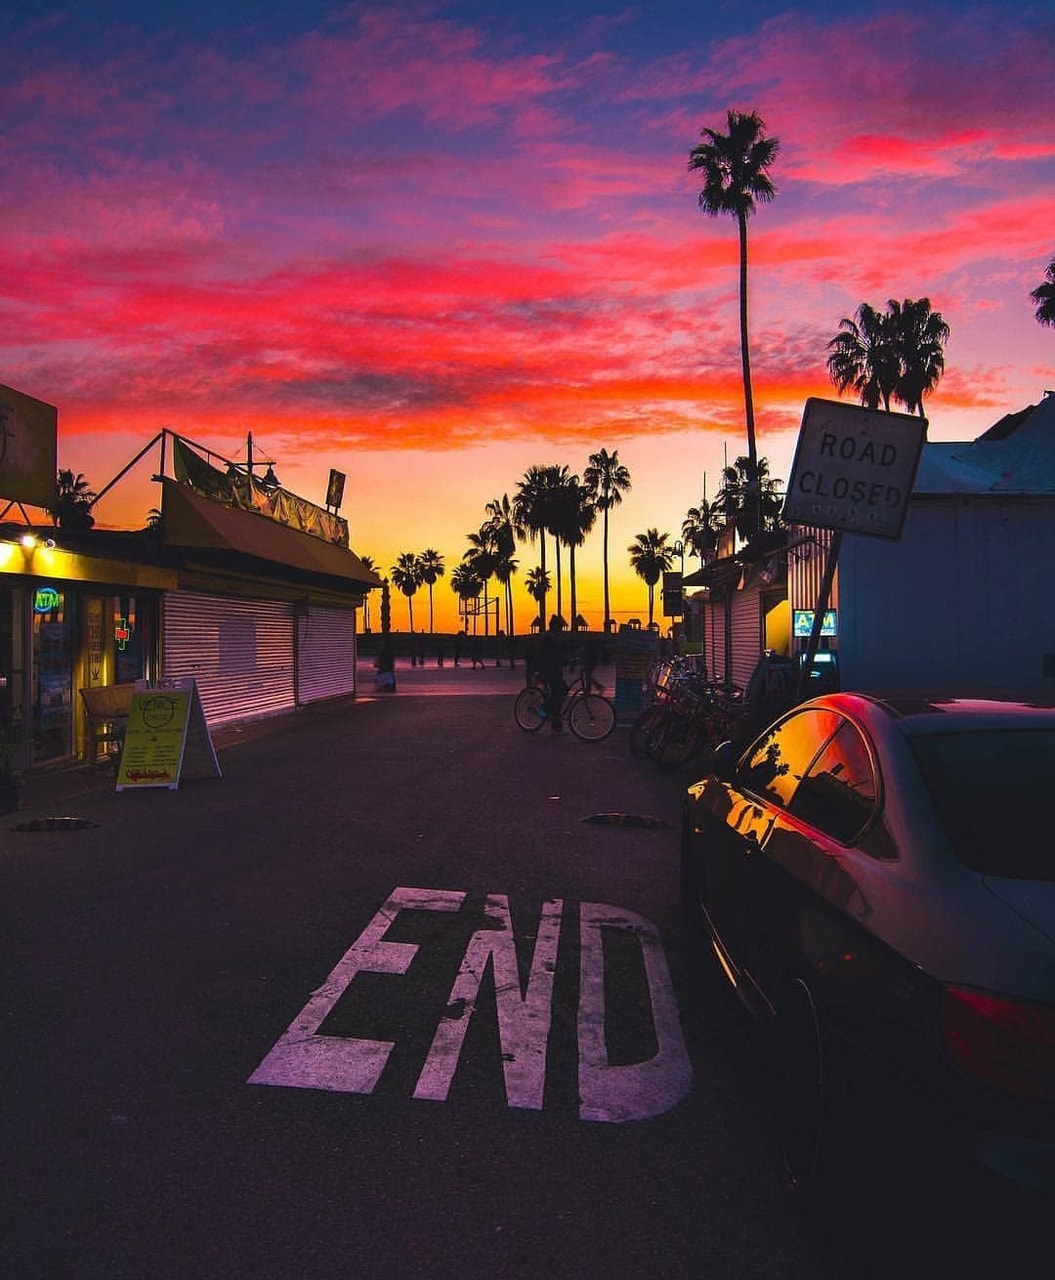 A car parked in front of an end sign - California